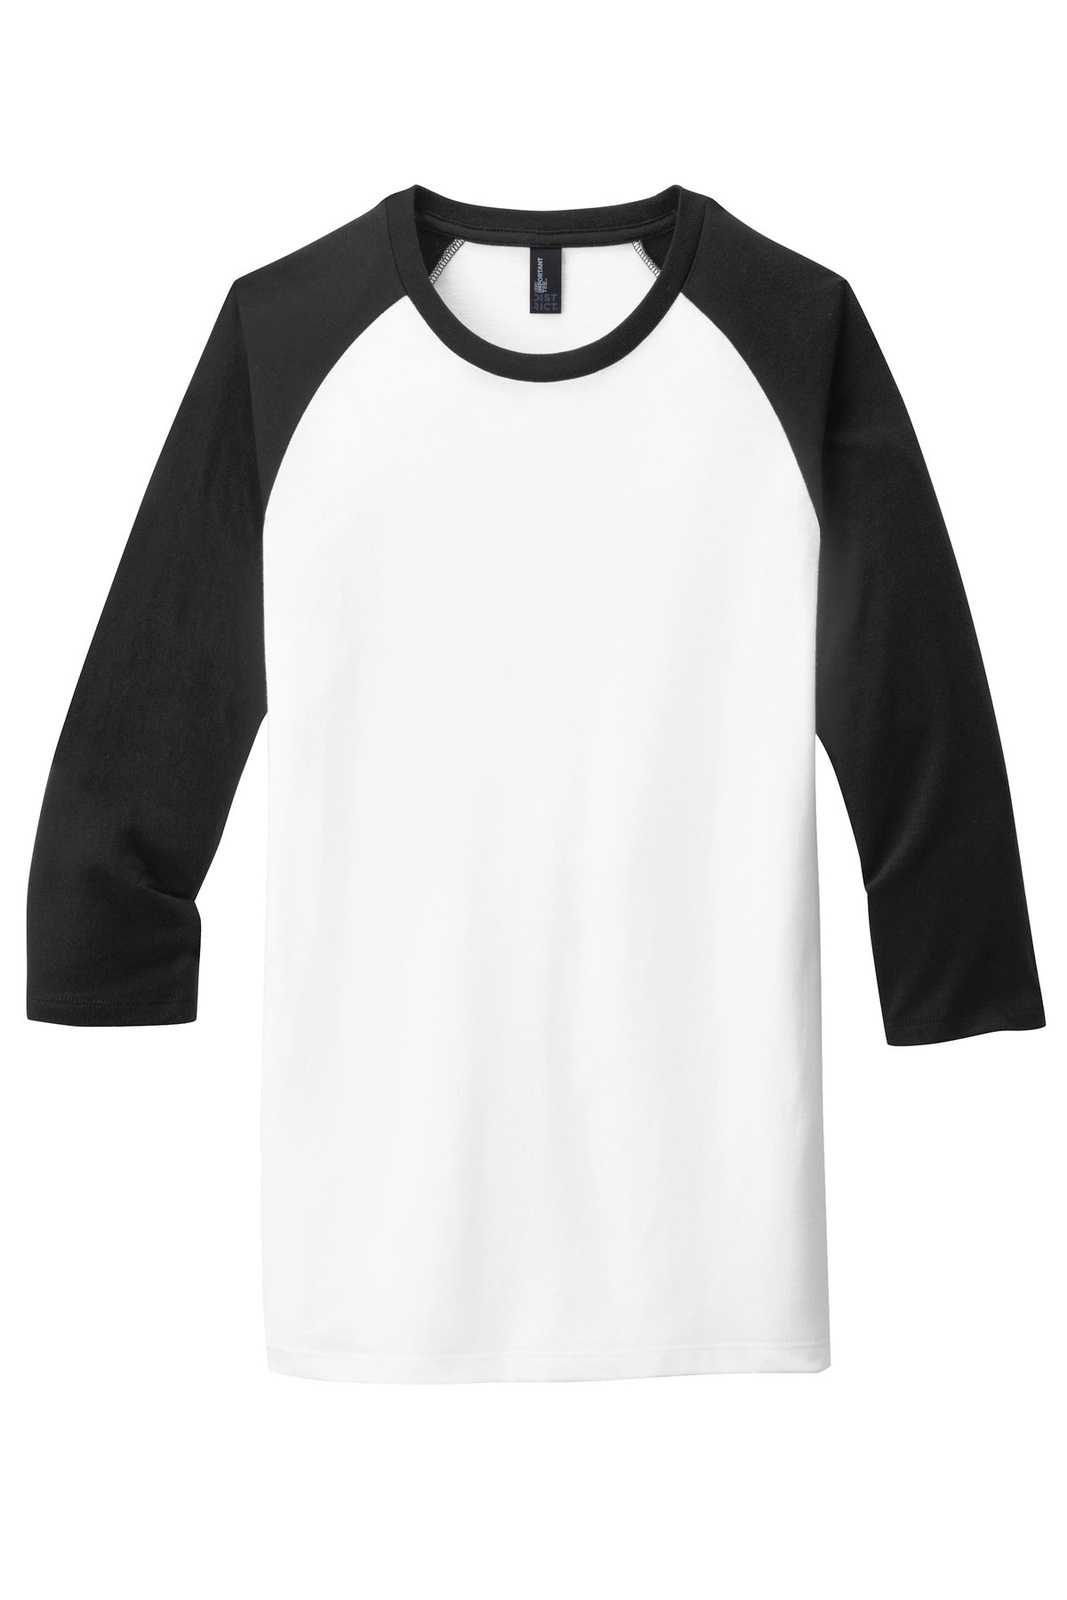 District DT6210 Very Important Tee 3/4-Sleeve Raglan - Black White - HIT a Double - 5